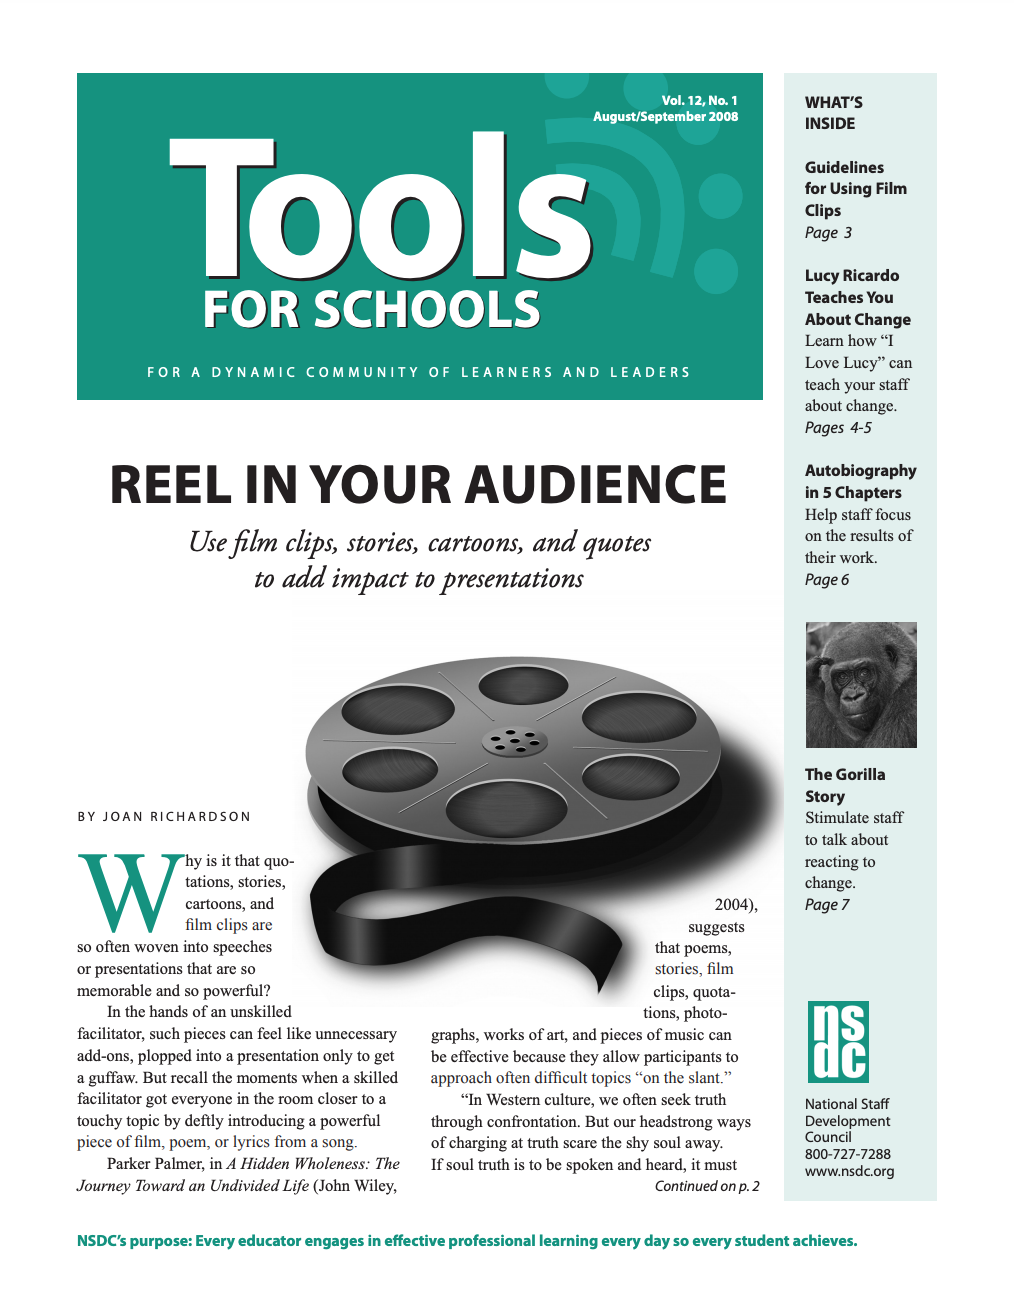 Image for aesthetic effect only - Tools-for-schools-august-september-2008-vol-12-no-1